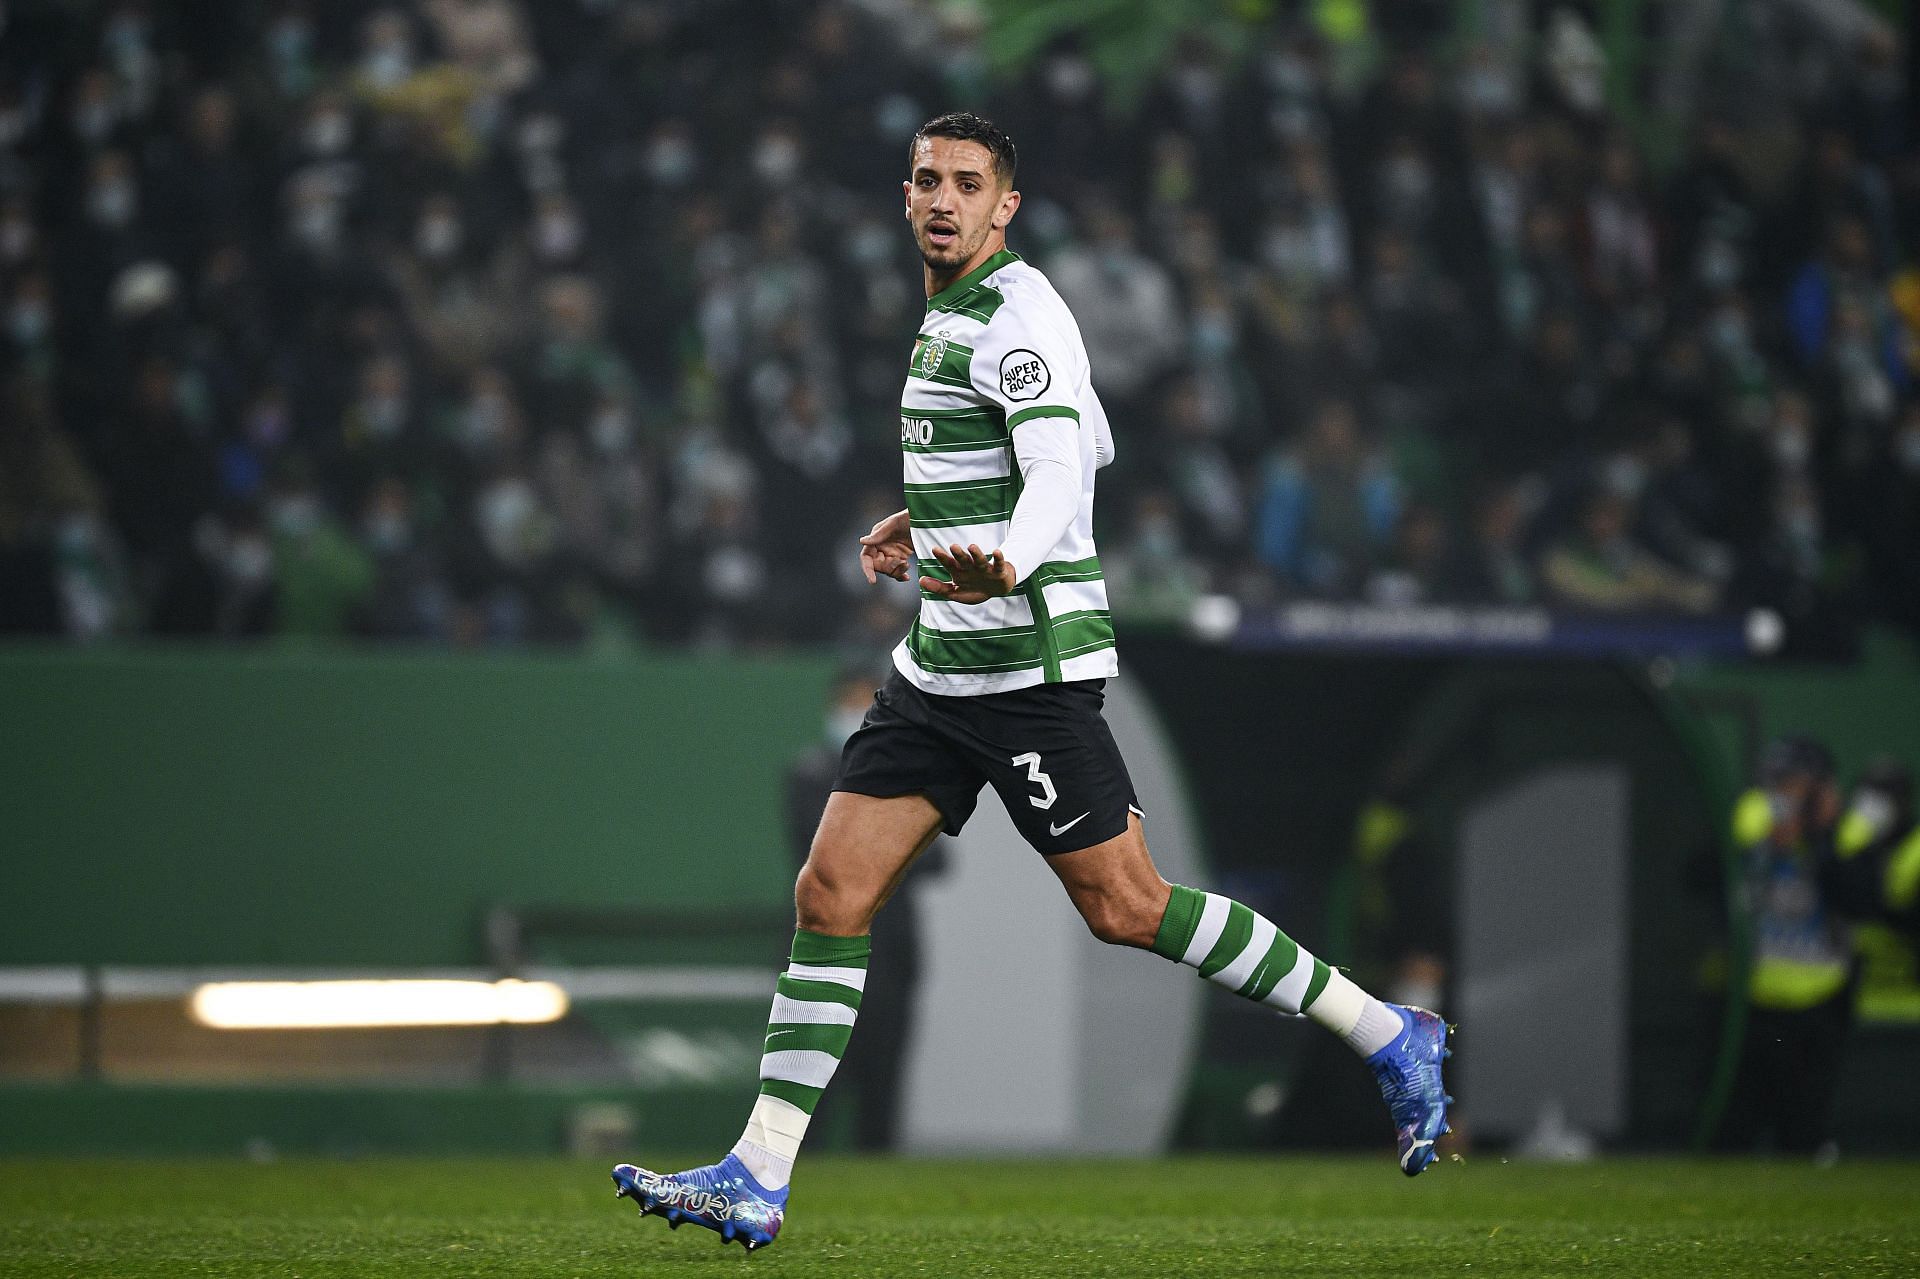 Sporting CP play Porto on Friday